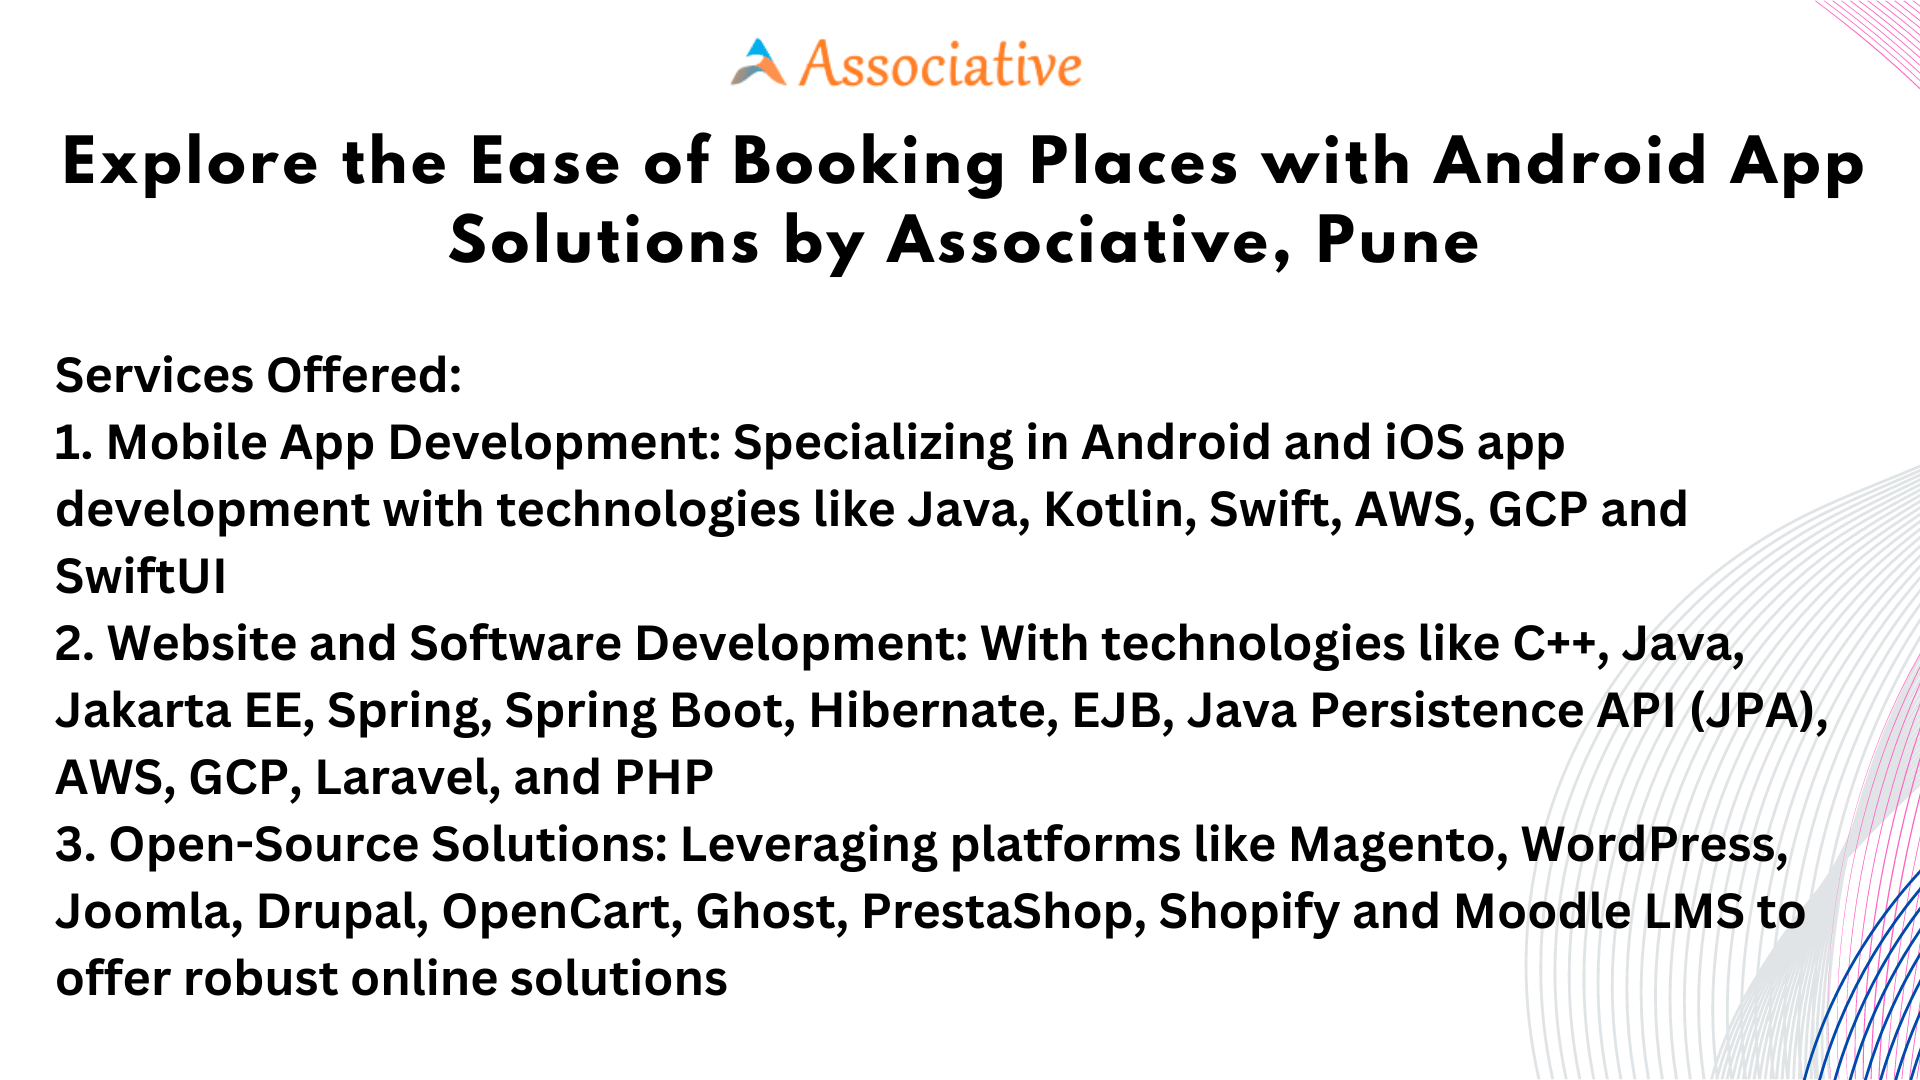 Explore the Ease of Booking Places with Android App Solutions by Associative, Pune